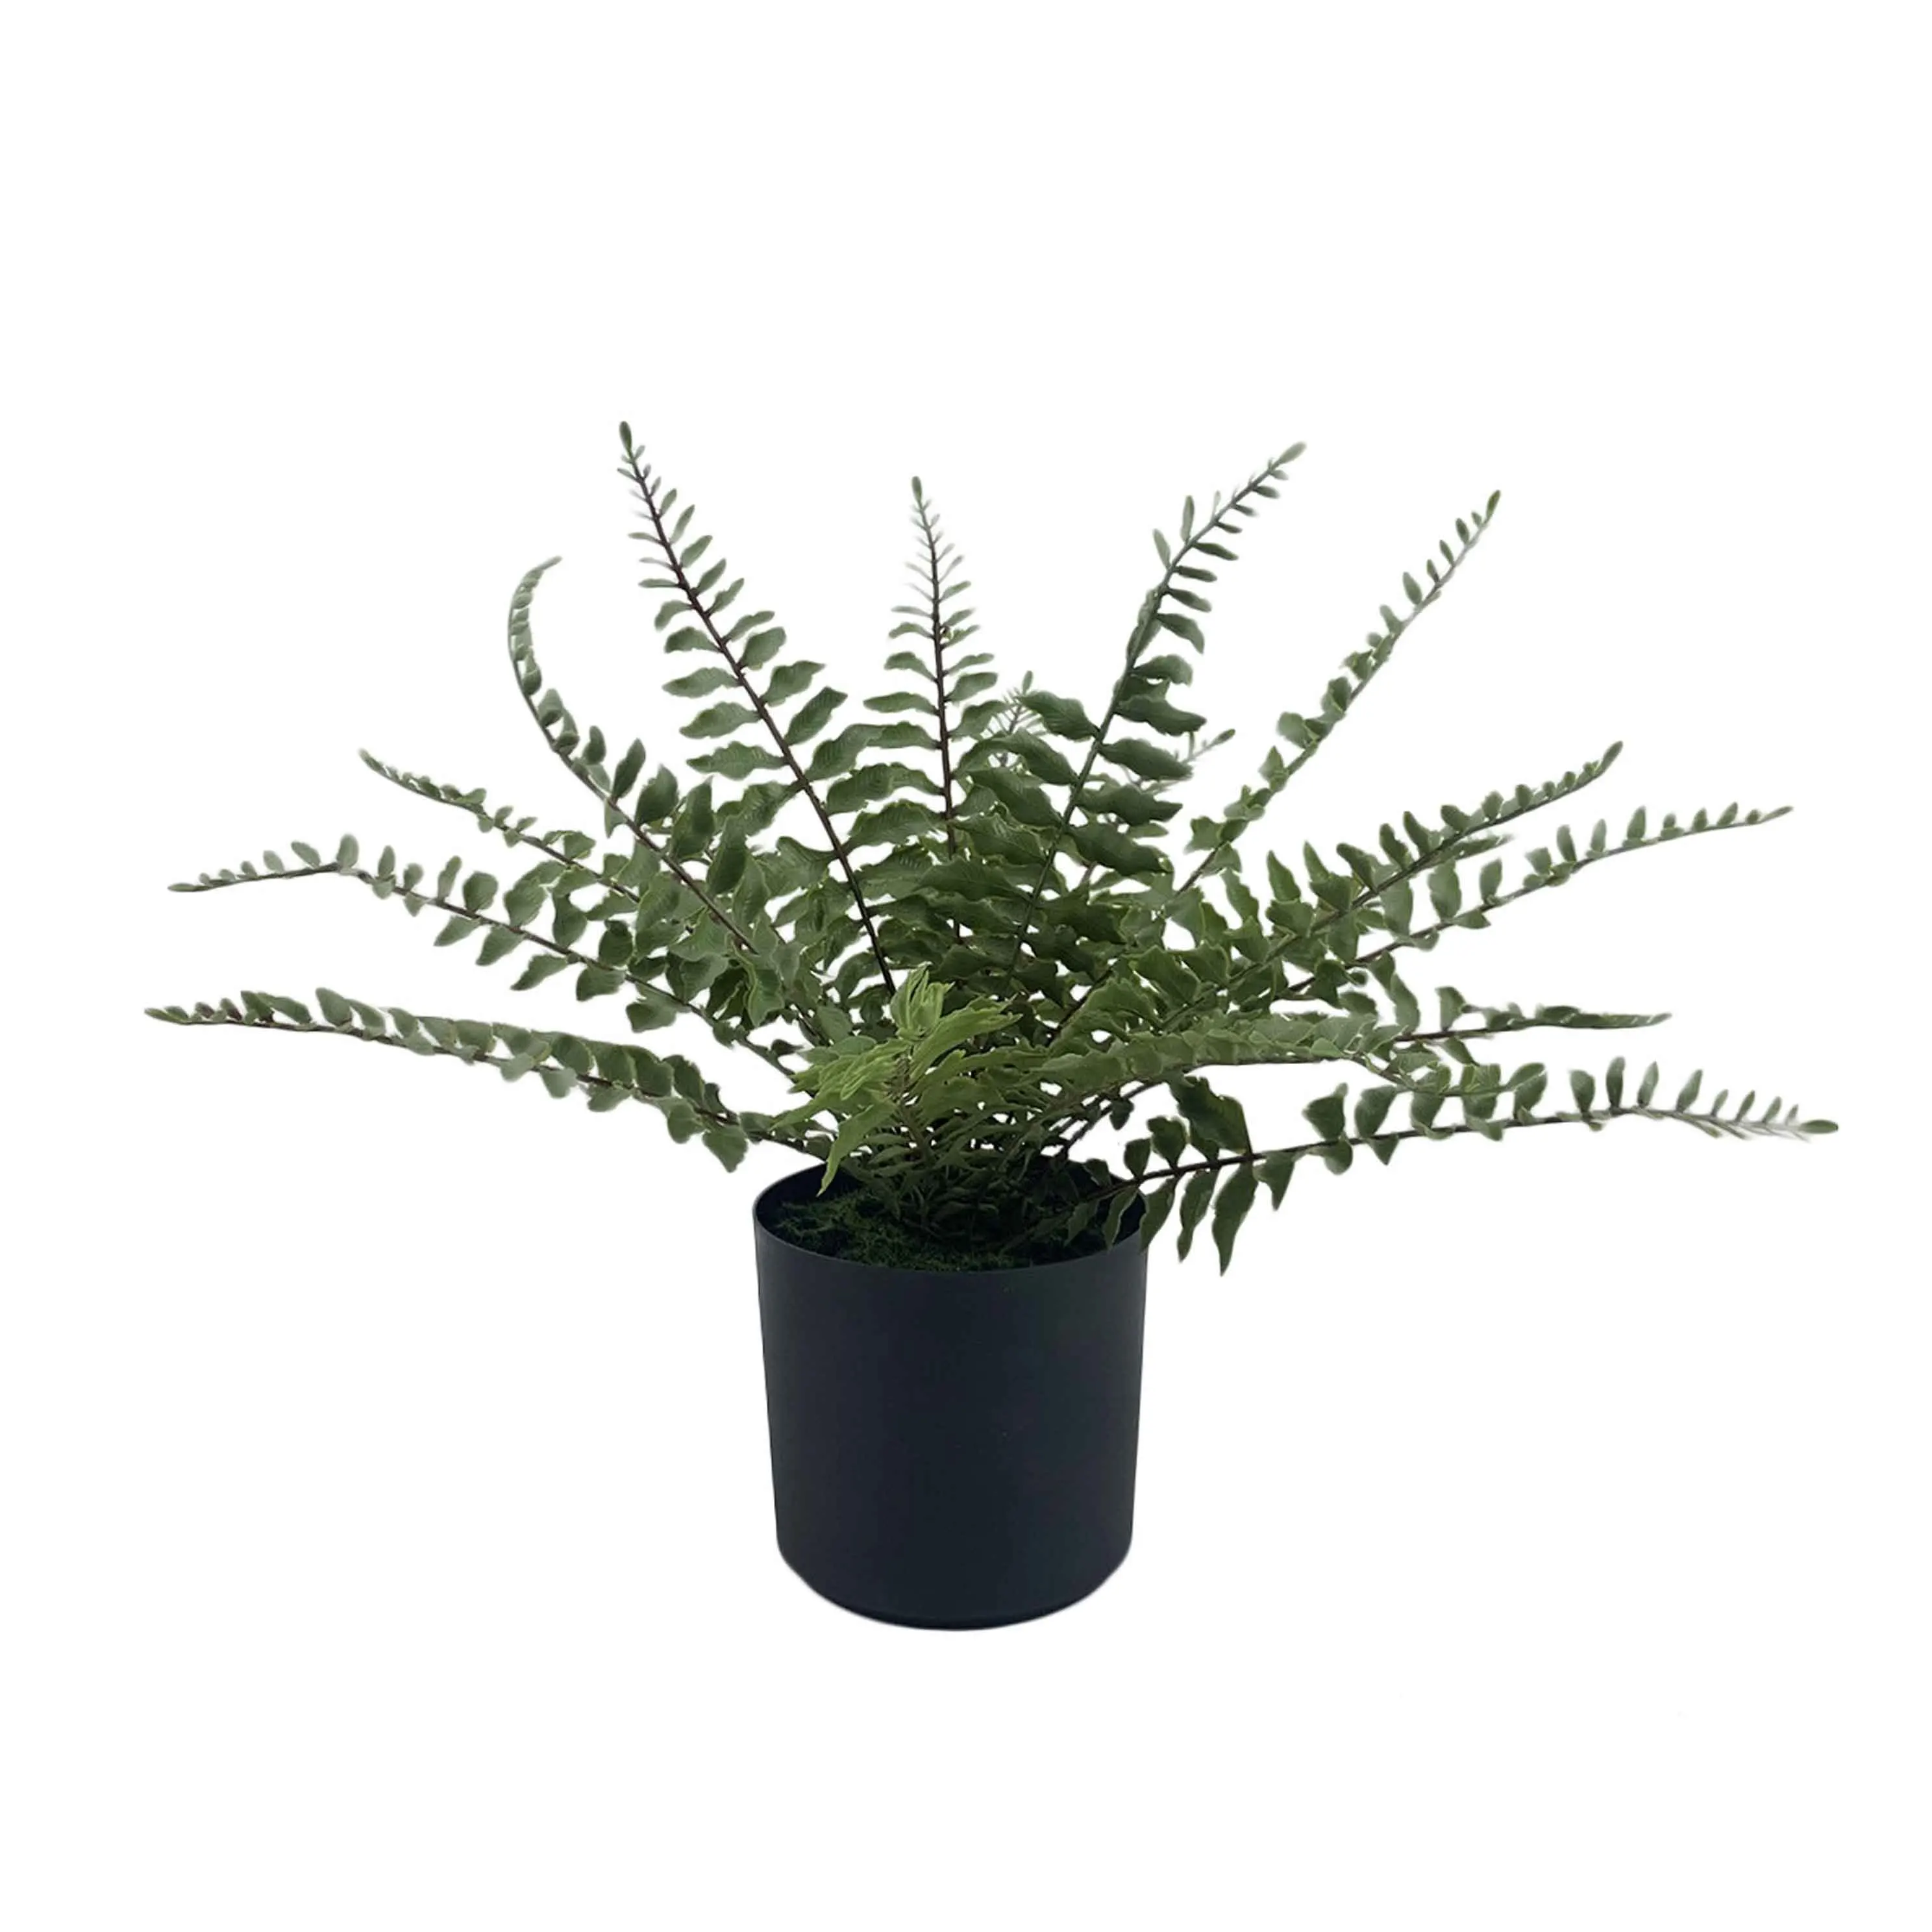 faux plant trees Outdoor Home Decoration Bonsai Foiliage Fern Wholesale high quality wedding party plastic faux greenery